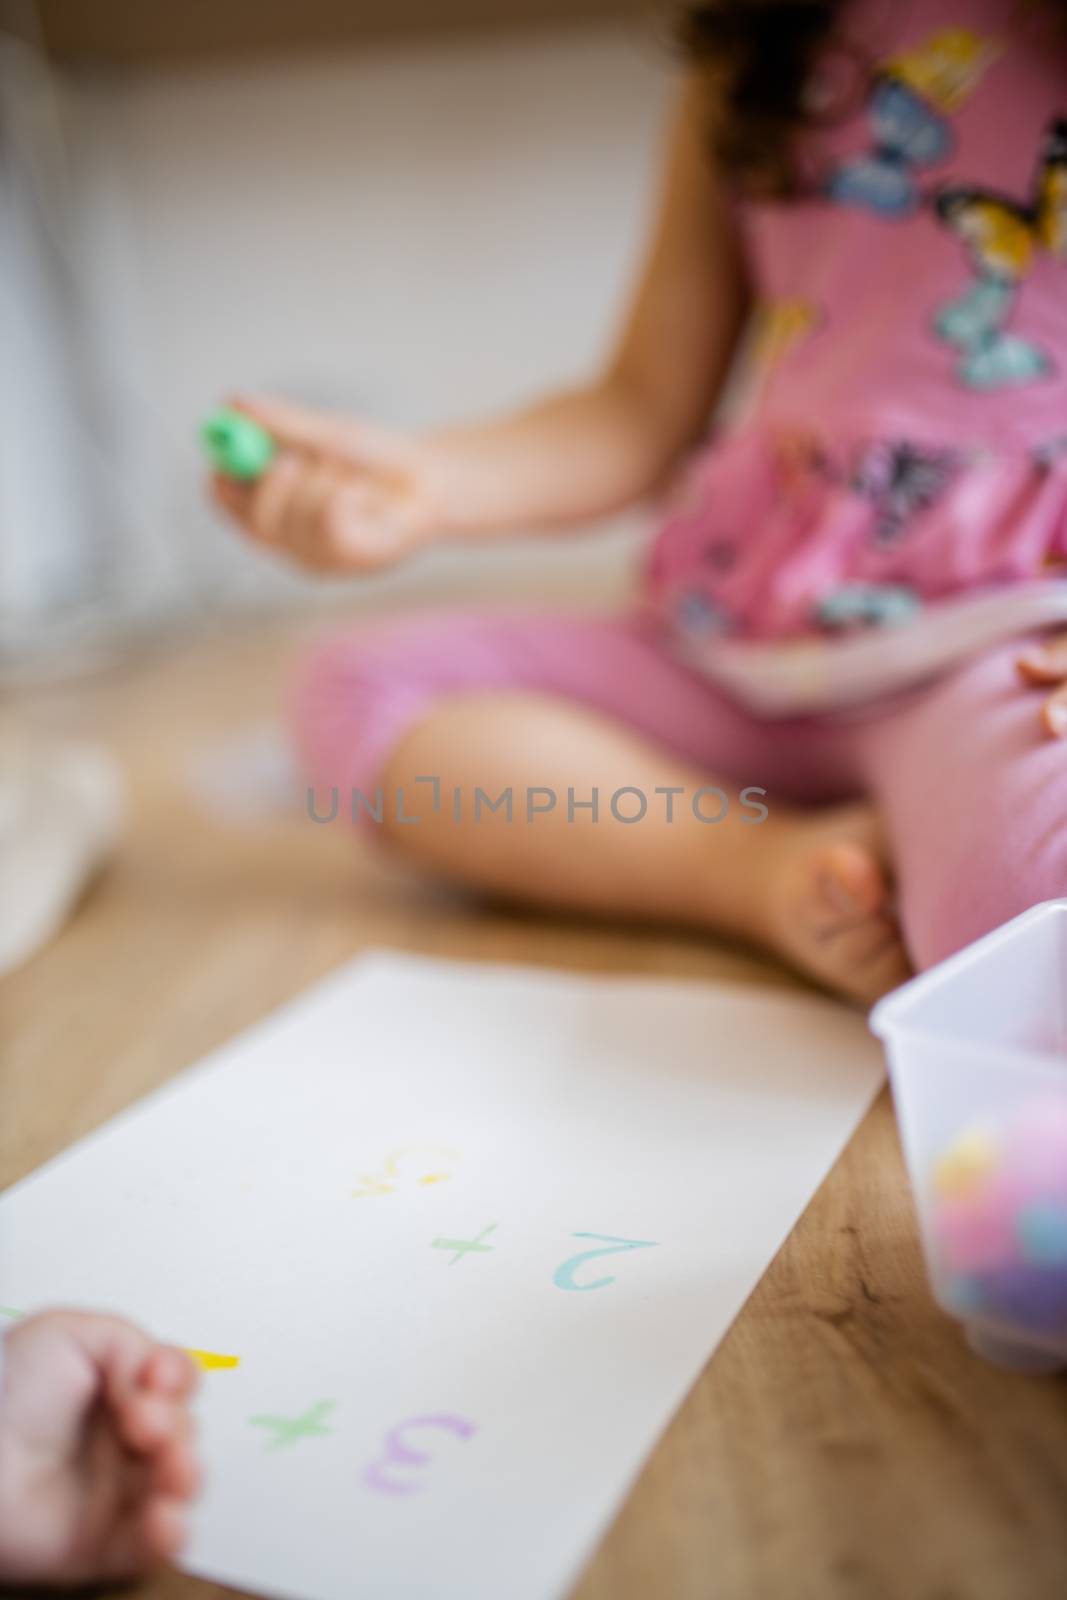 Portrait picture of a little girl in a pink dress sitting on the wooden floor and doing sums on a paper sheet with a green textmarker, alongside a plastic box and blurry baby hand